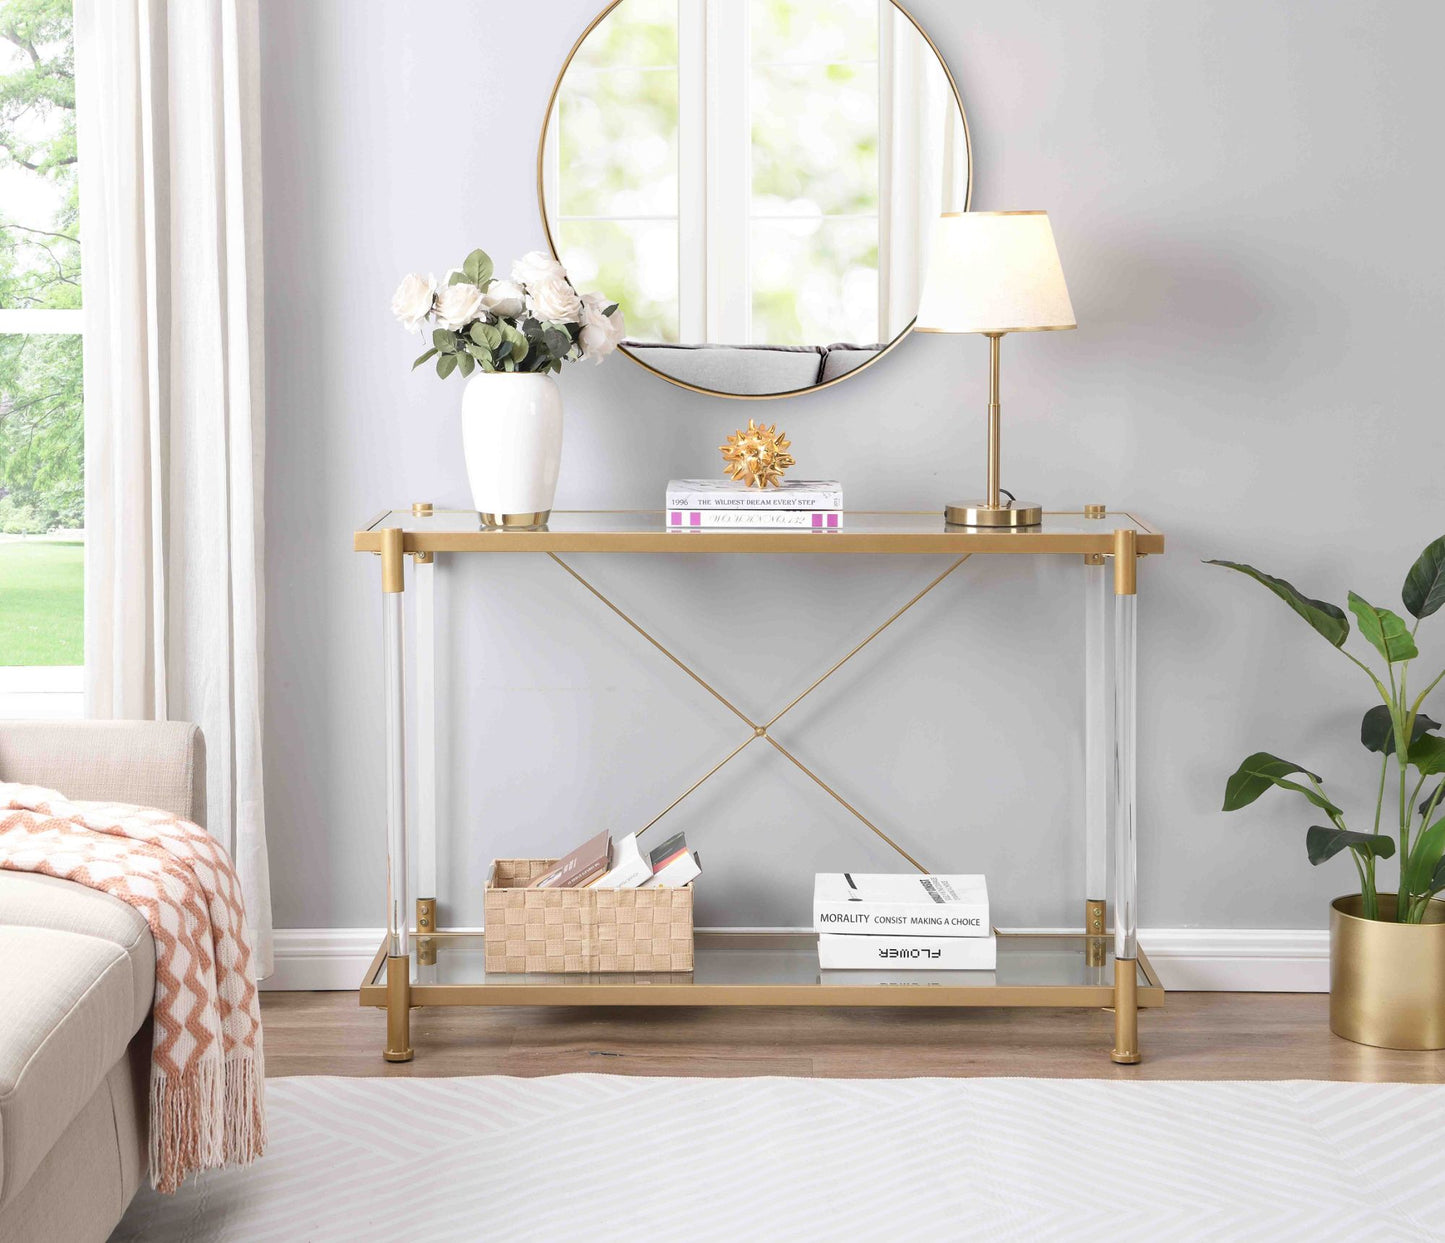 43.31'' Golden Glass Sofa Table, Acrylic Side Table, Console Table for Living Roome& Bedroom